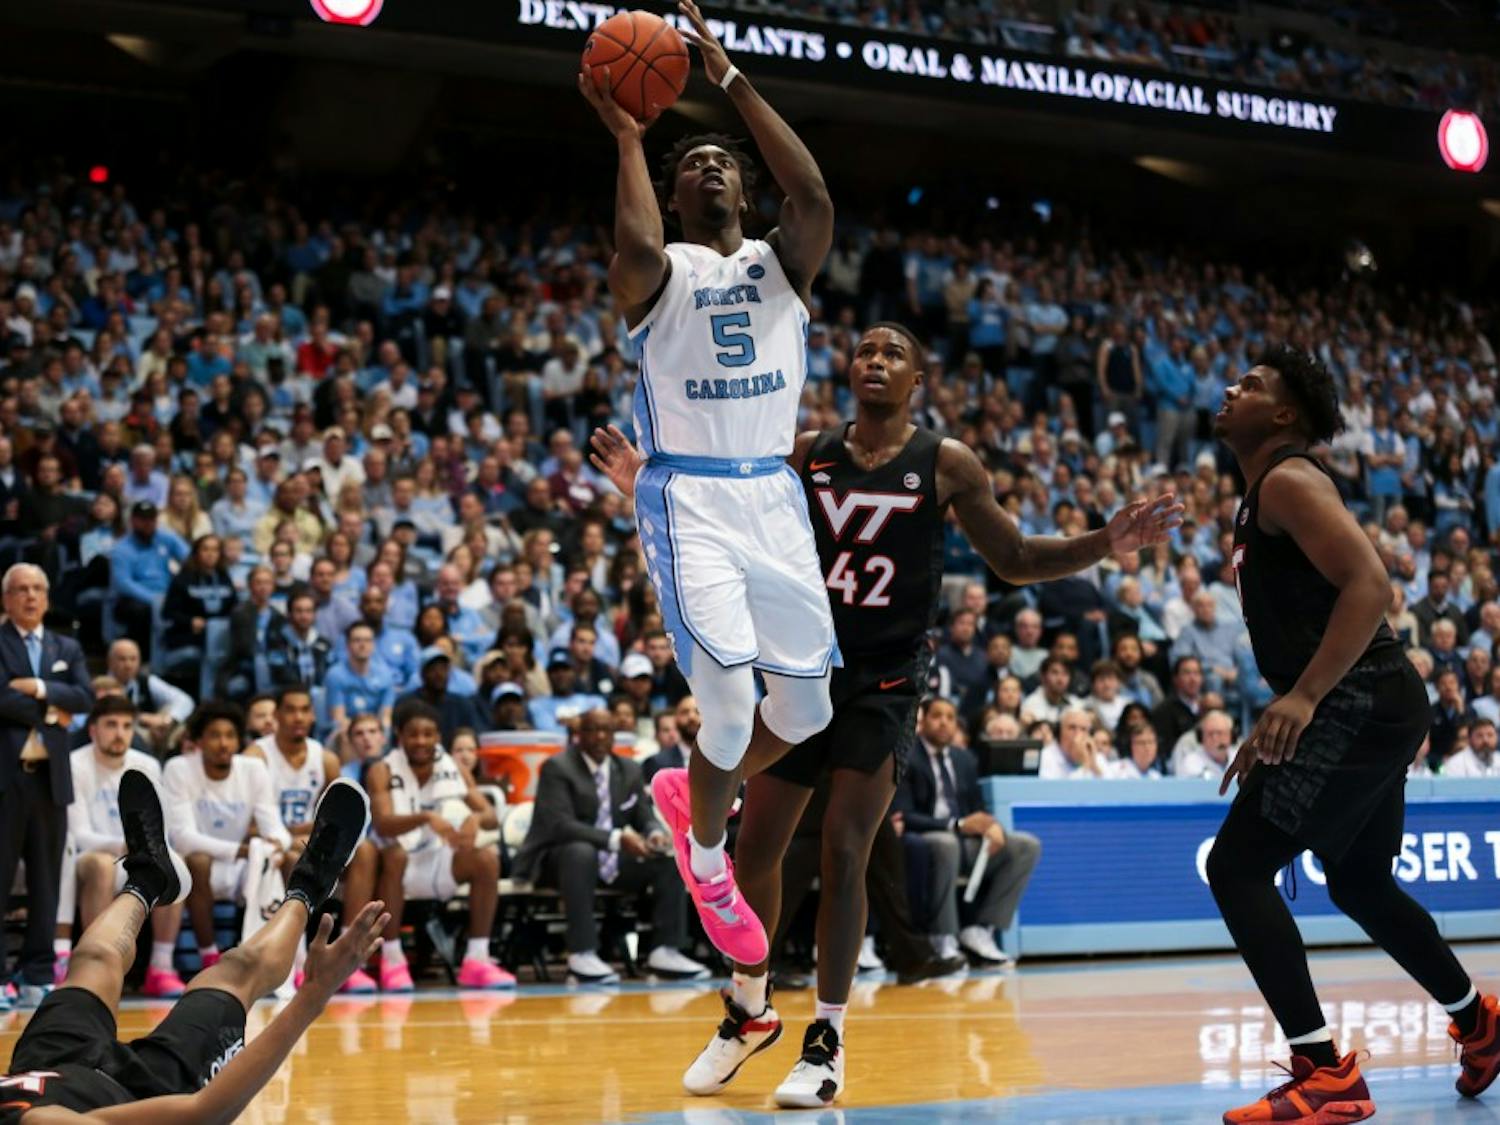 Forward Nassir Little (5) shoots the ball during the men's basketball game vs. Virginia Tech at the Smith Center on Monday, Jan. 21, 2019. The Tar Heels won 103-82.